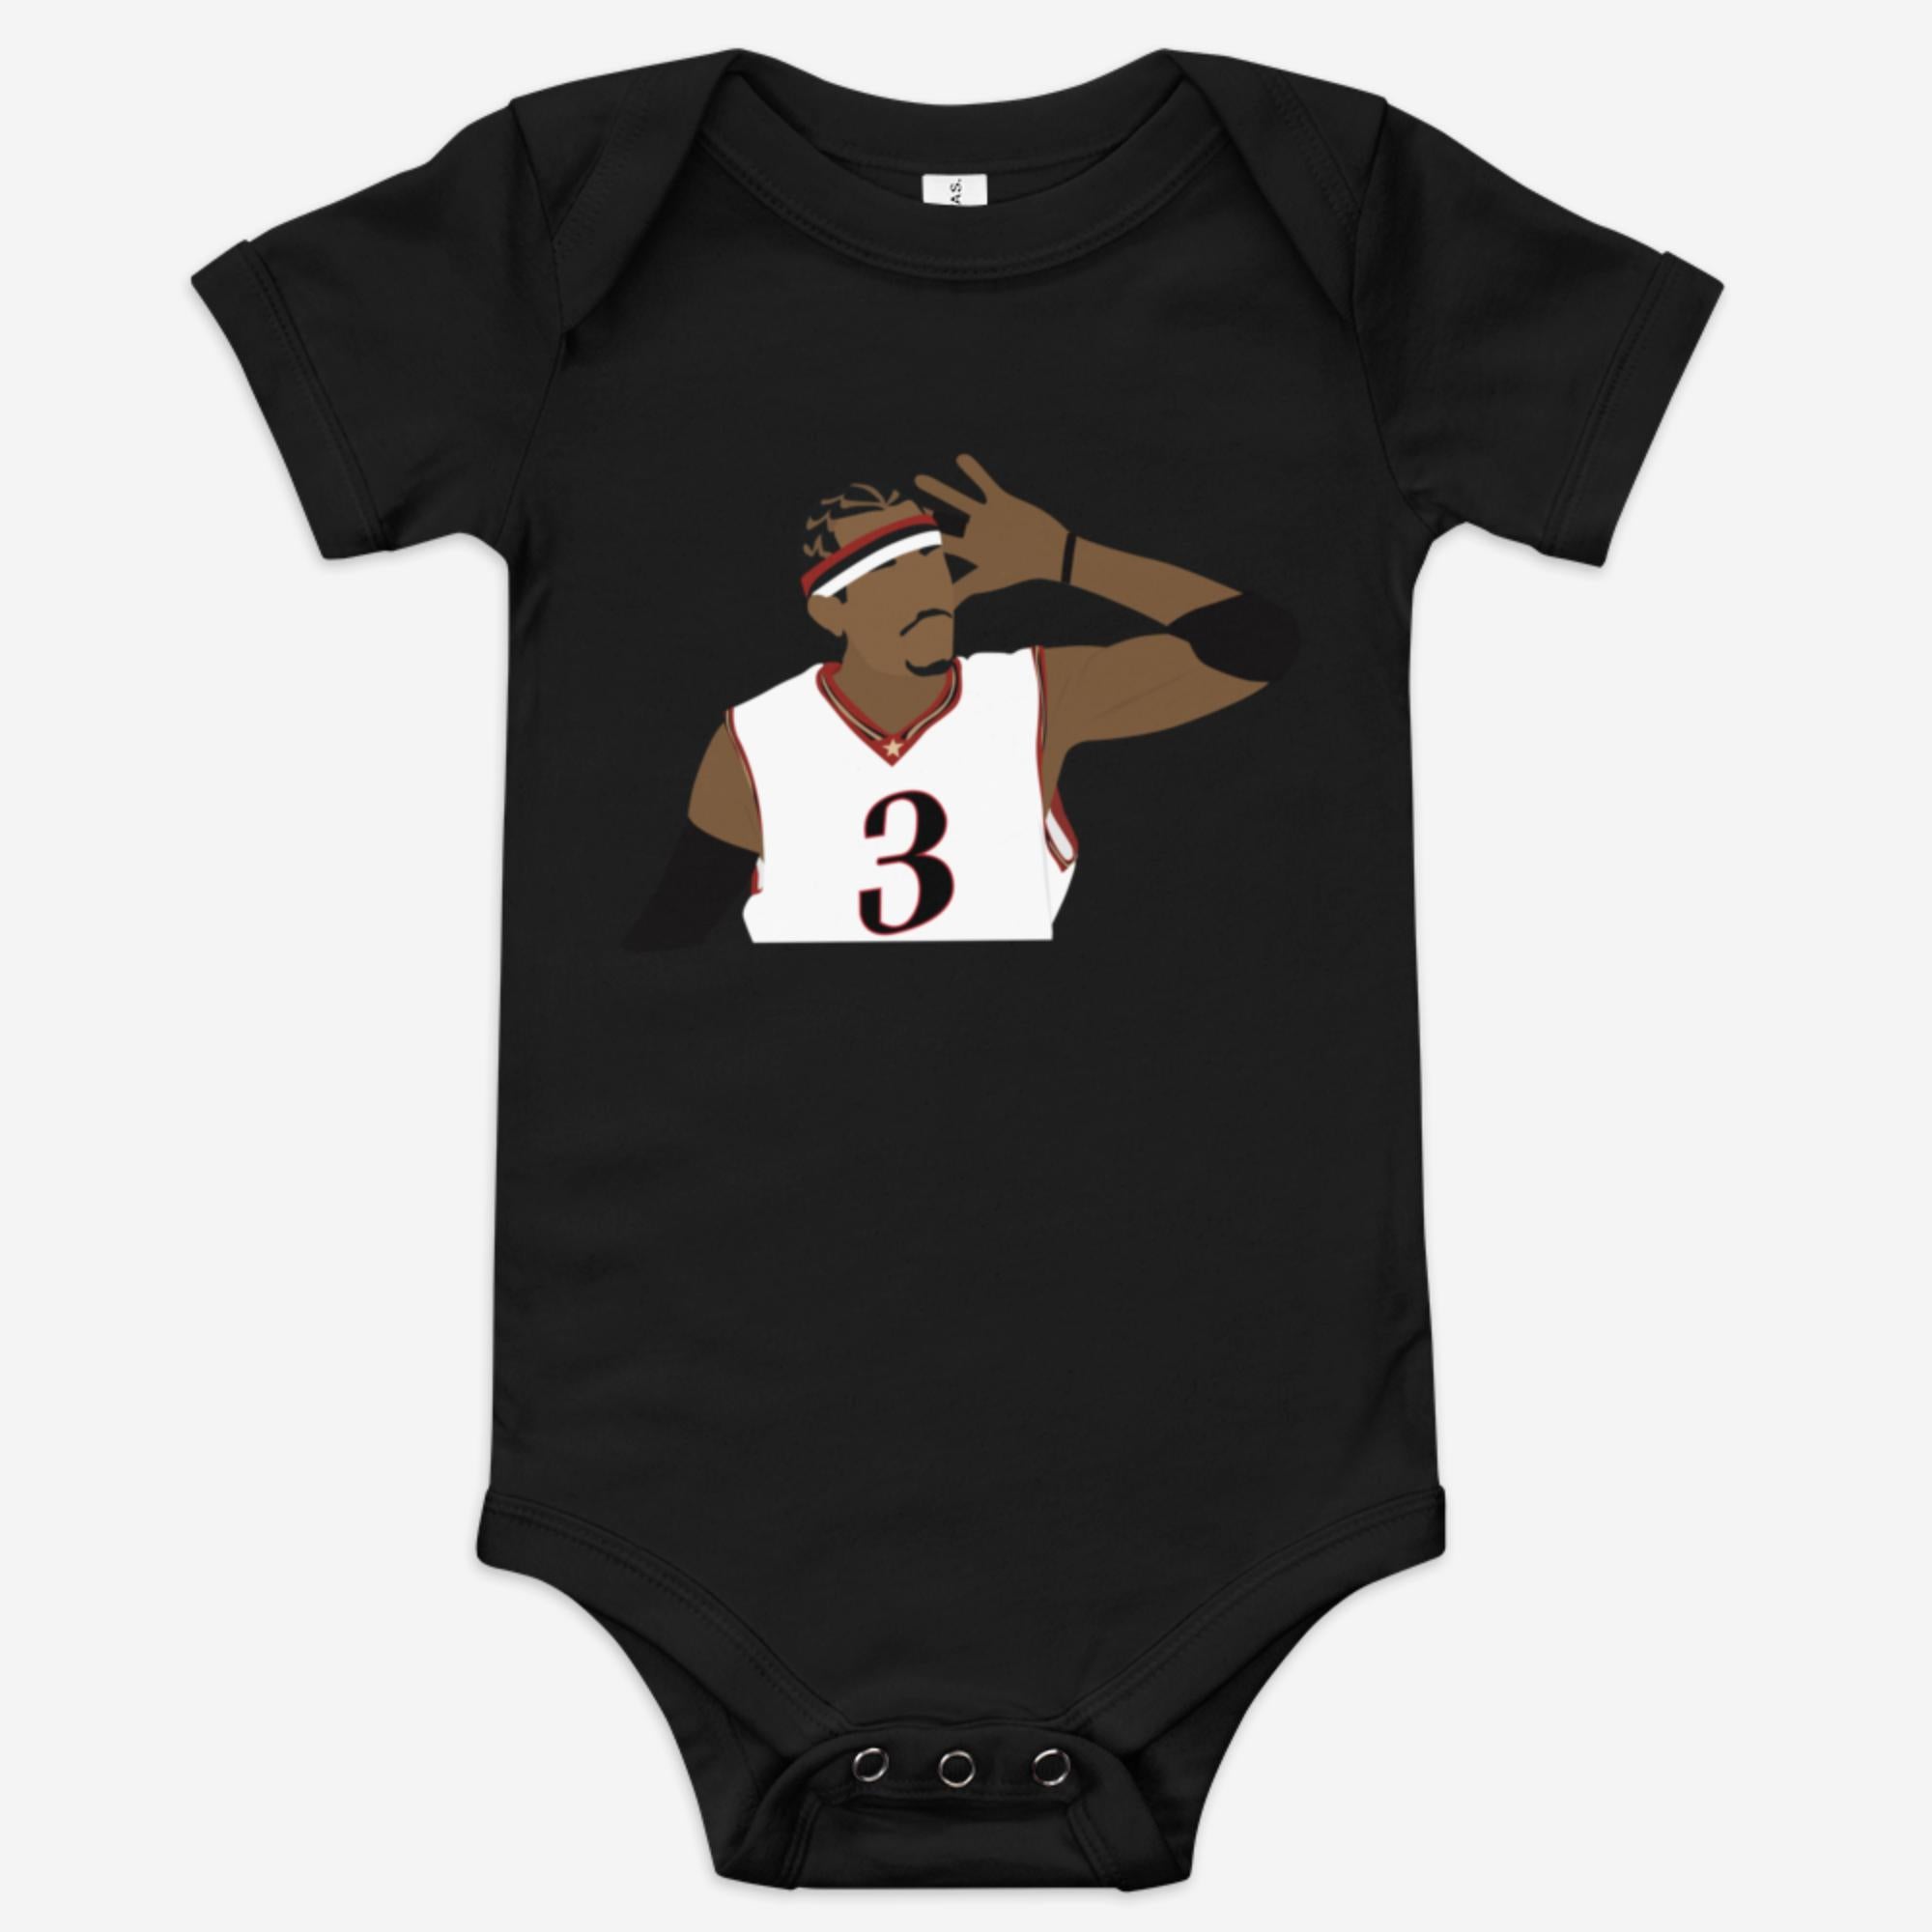 "The Answer" Baby Onesie